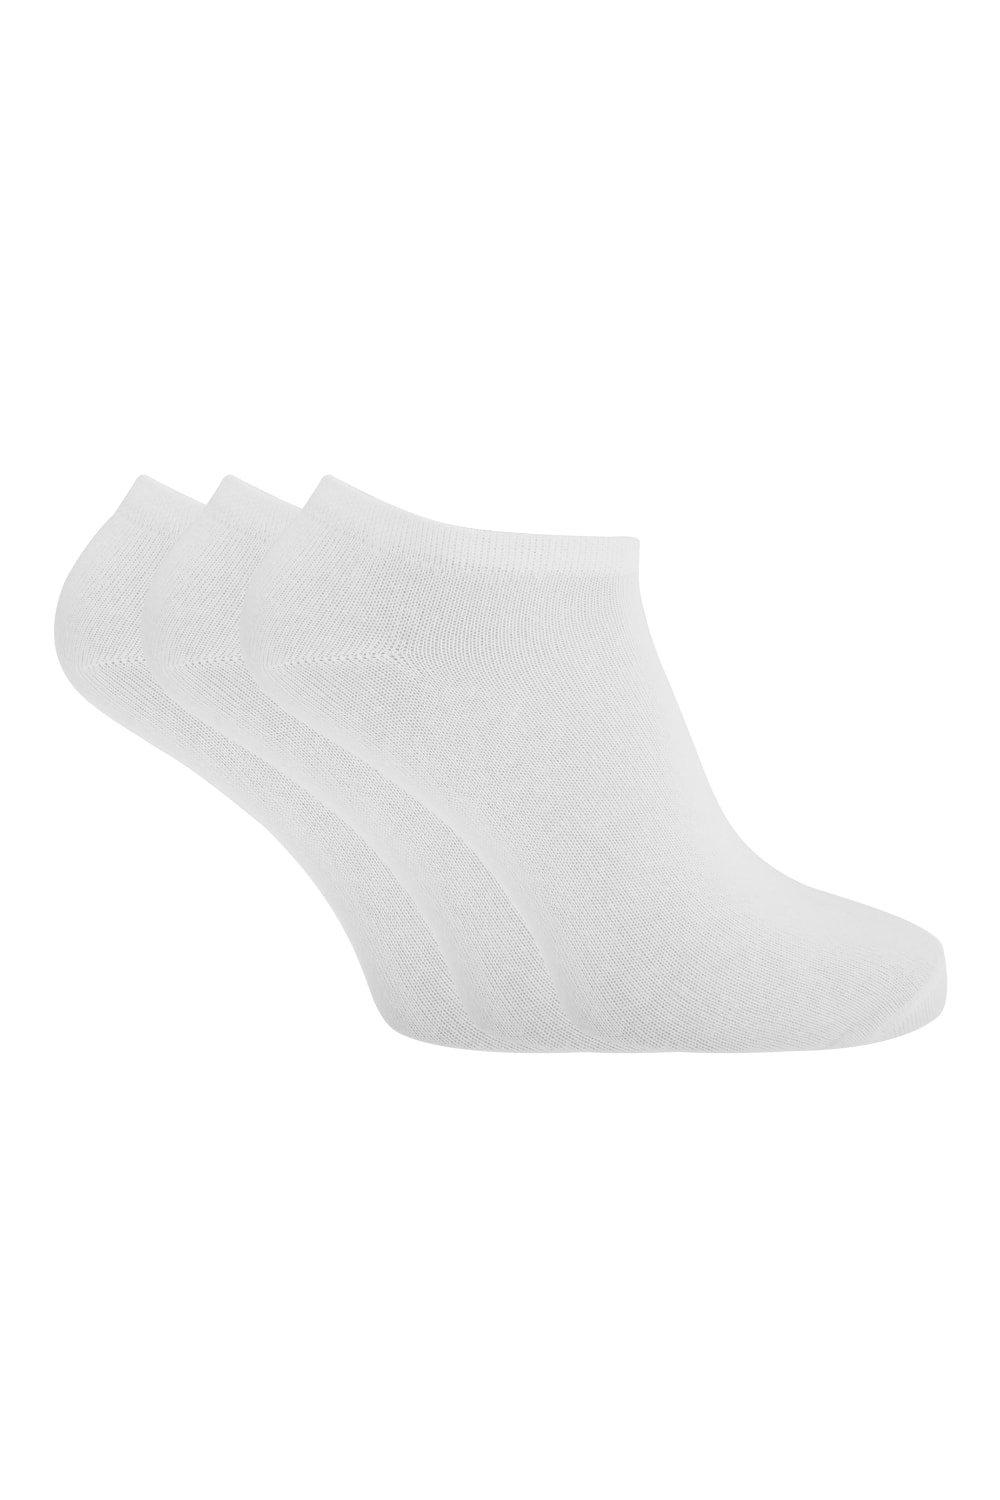 Cotton Rich Lycra Trainer Socks (Pack Of 3)